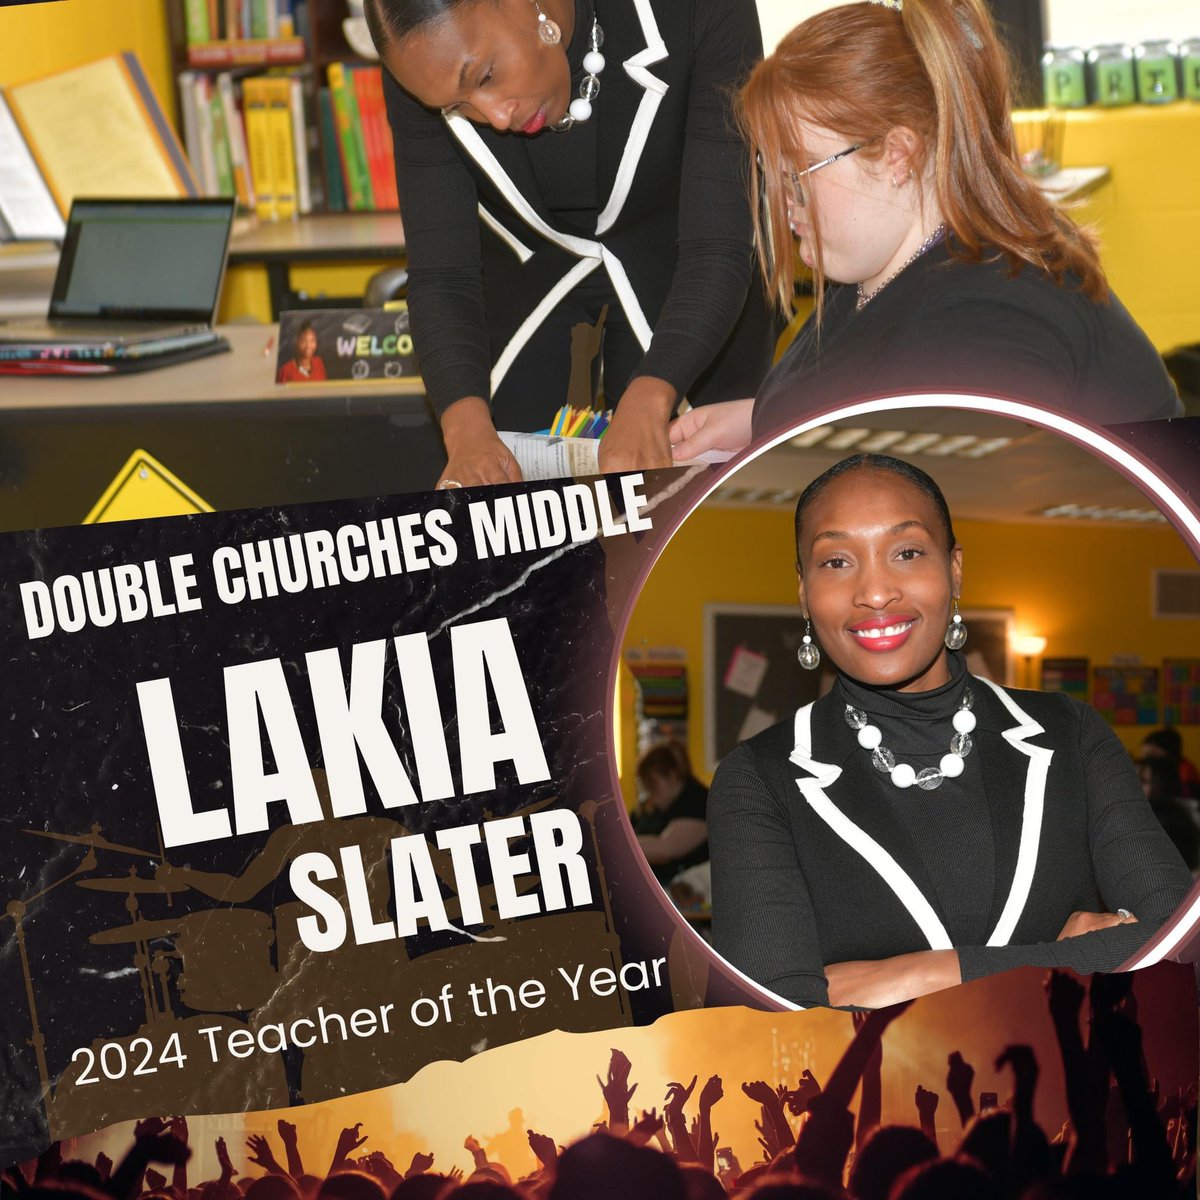 #WhereAreTheyWednesday
We love hearing about the accomplishments of our Eufaula High School alumni.  🐅🎓 Lakia Slater is a 2003 graduate of EHS and received Double Churches Middle School's 2024 Teacher of the Year. 📃 Congratulations! 🎉 #WeAreECS #ExpectExcellence